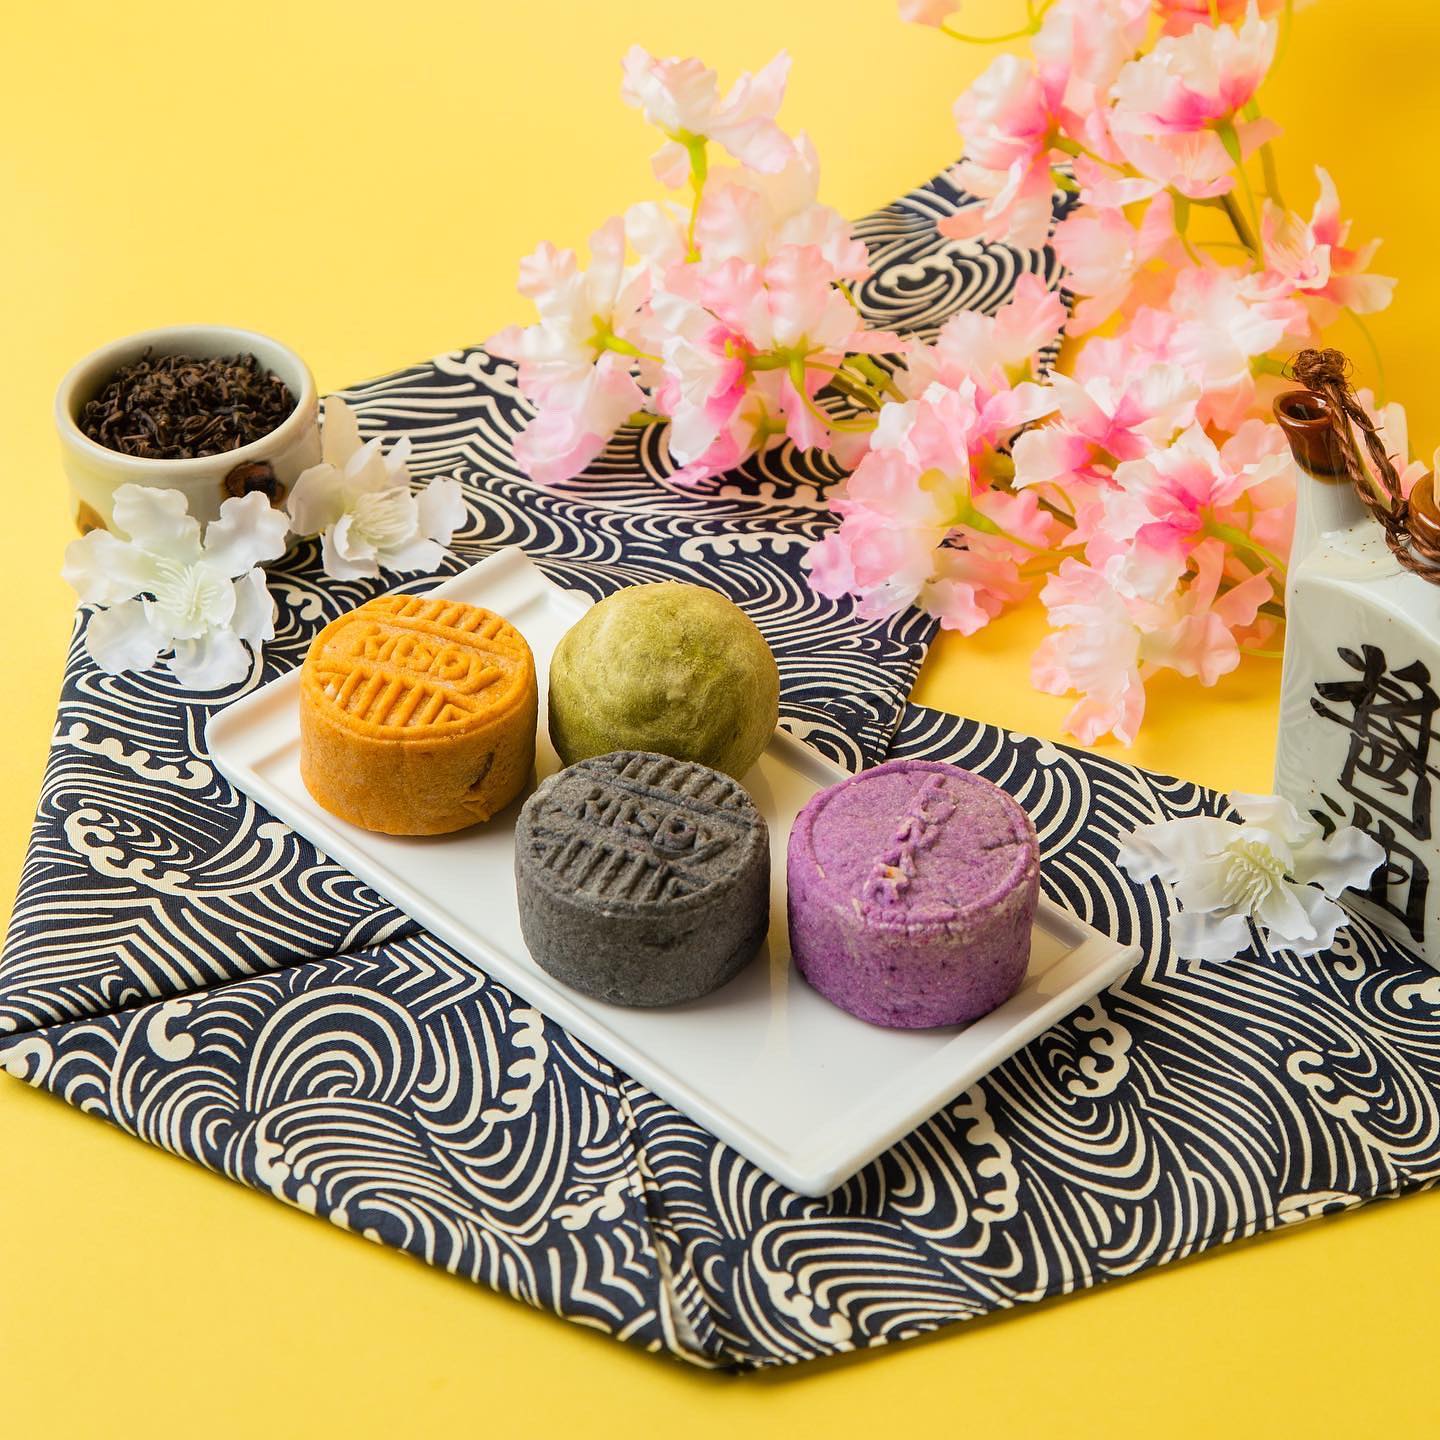 Flowers and assorted mooncakes sit atop a napkin with black swirls.